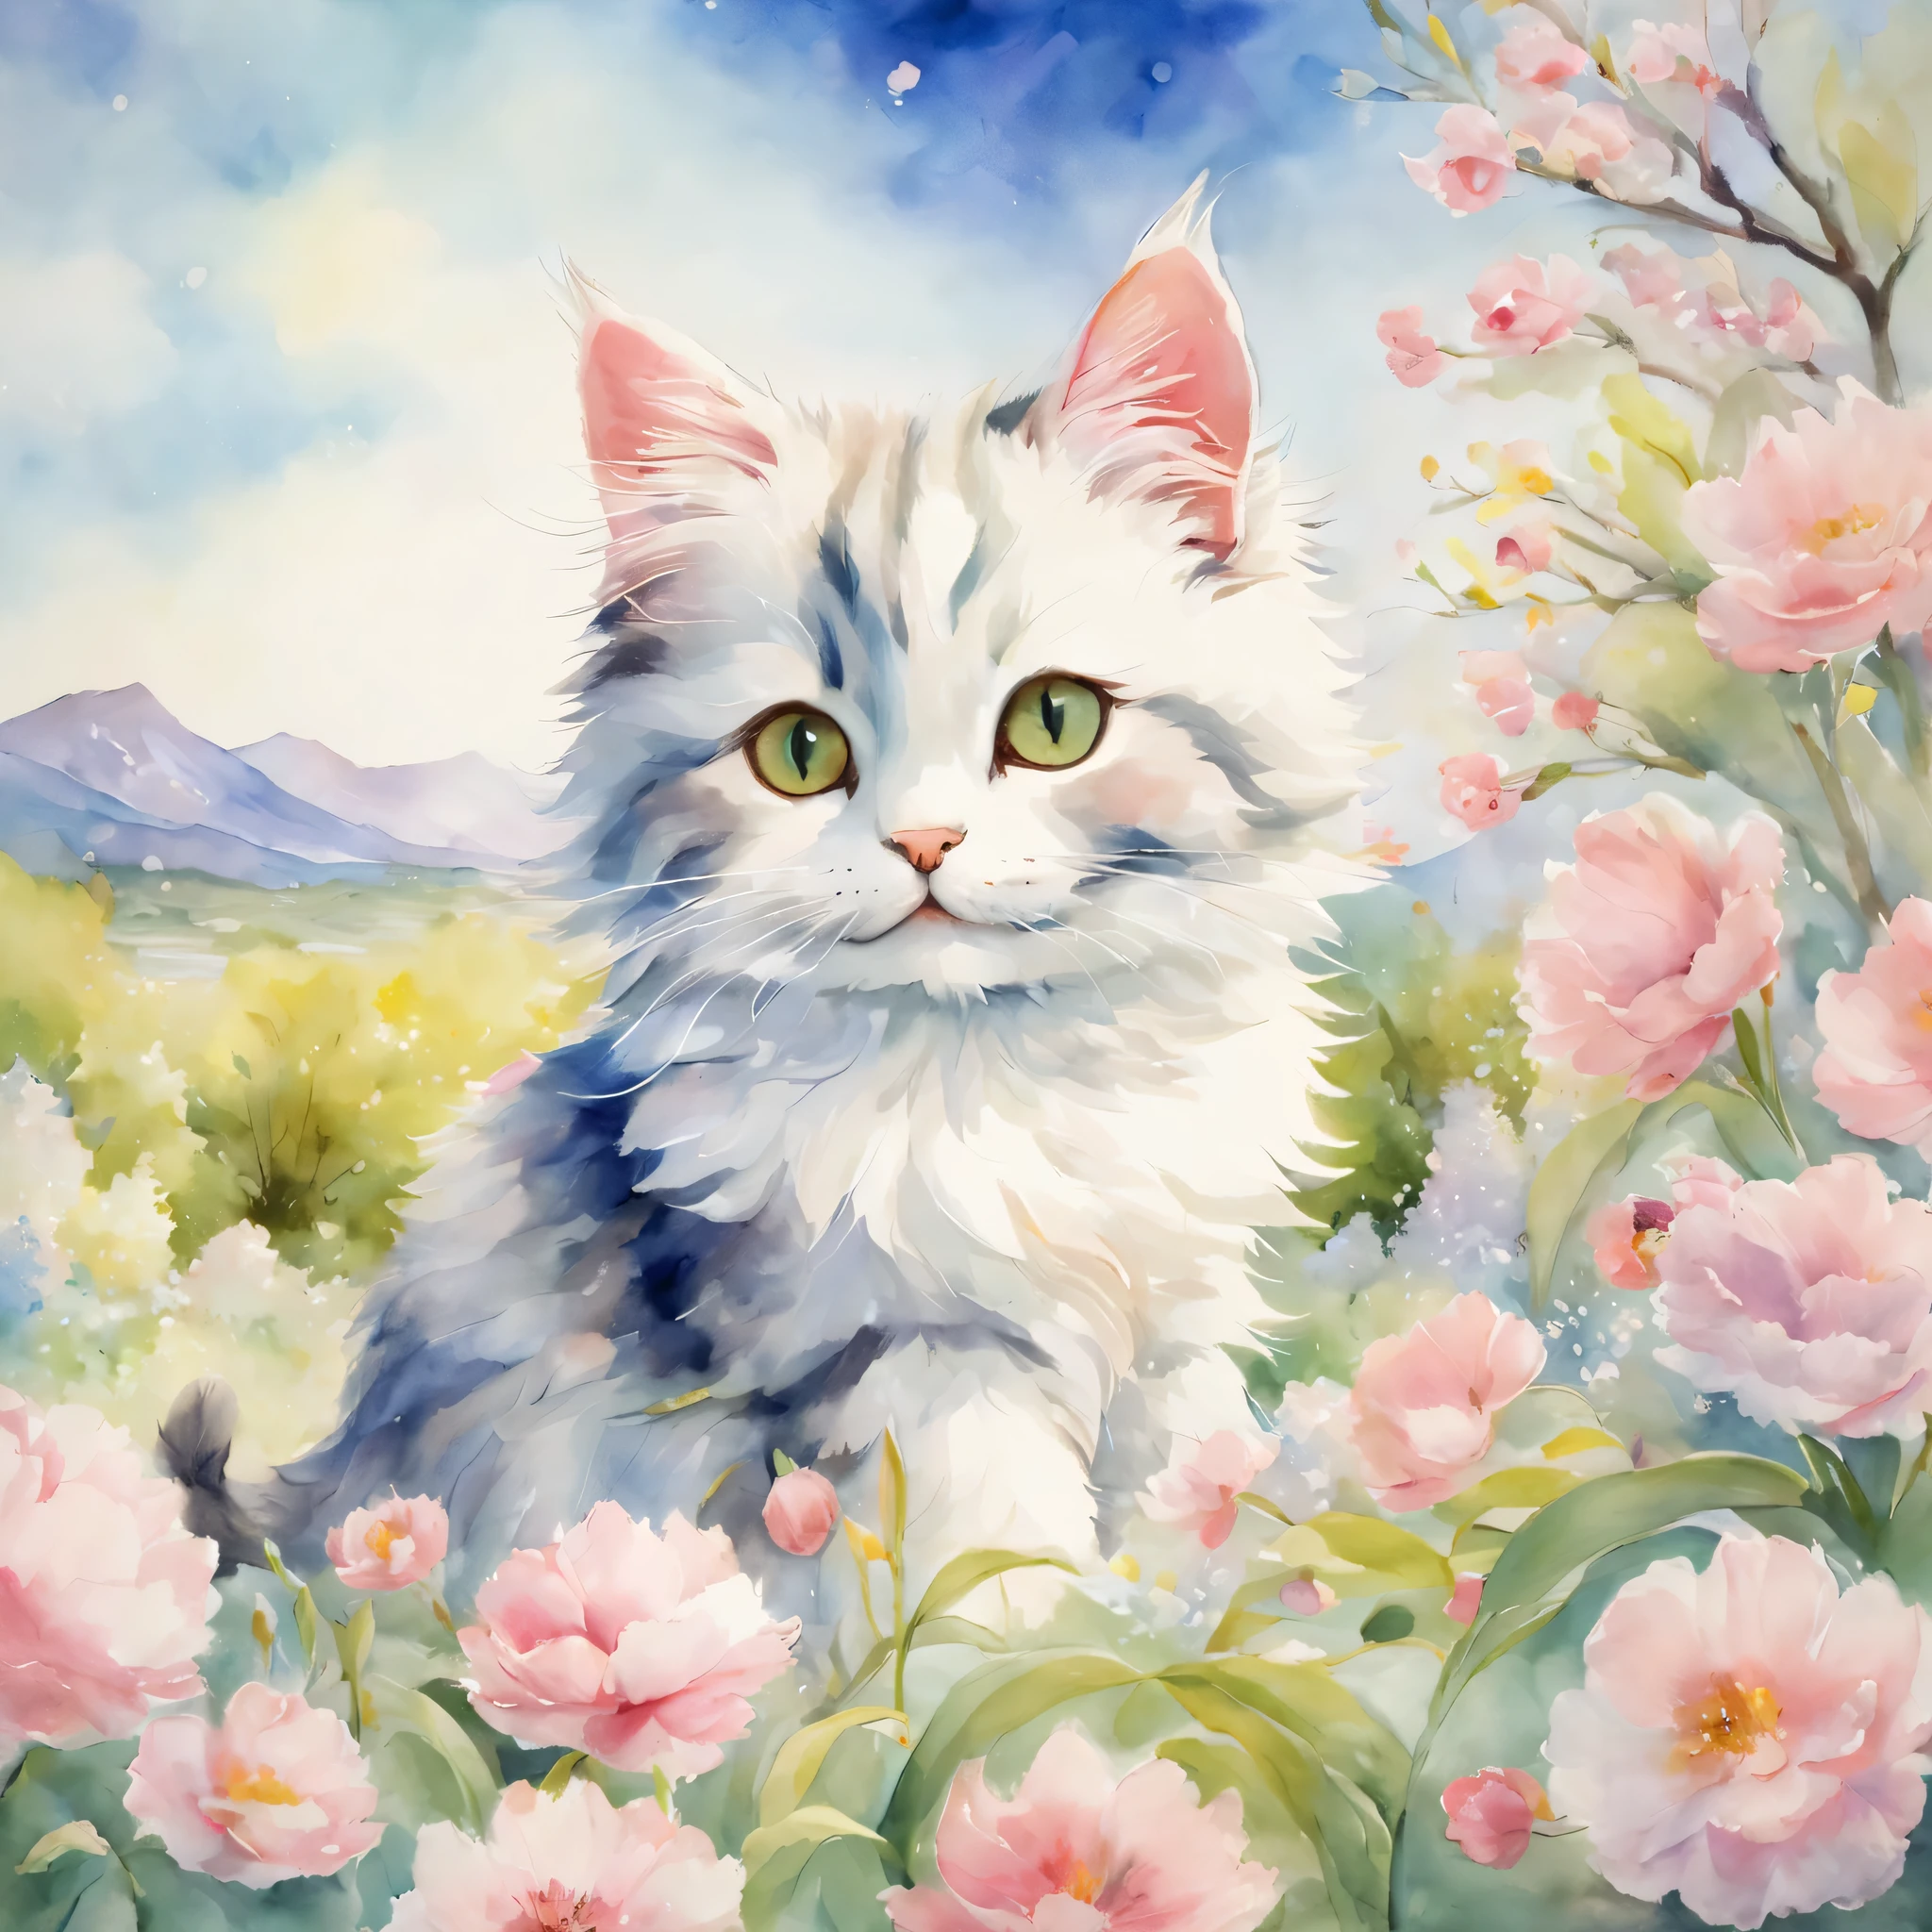 ((Cat enjoying spring)),spring blossoms,masterpiece,highest quality,fluffy cat,Little,cute,Futebutesi,fun,happiness,,Fashionable scenery,anatomically correct,All the best,最高にCute cat,Cute cat，,fantasy,randolph caldecott style,enlightenment,watercolor painting,Gentle shades